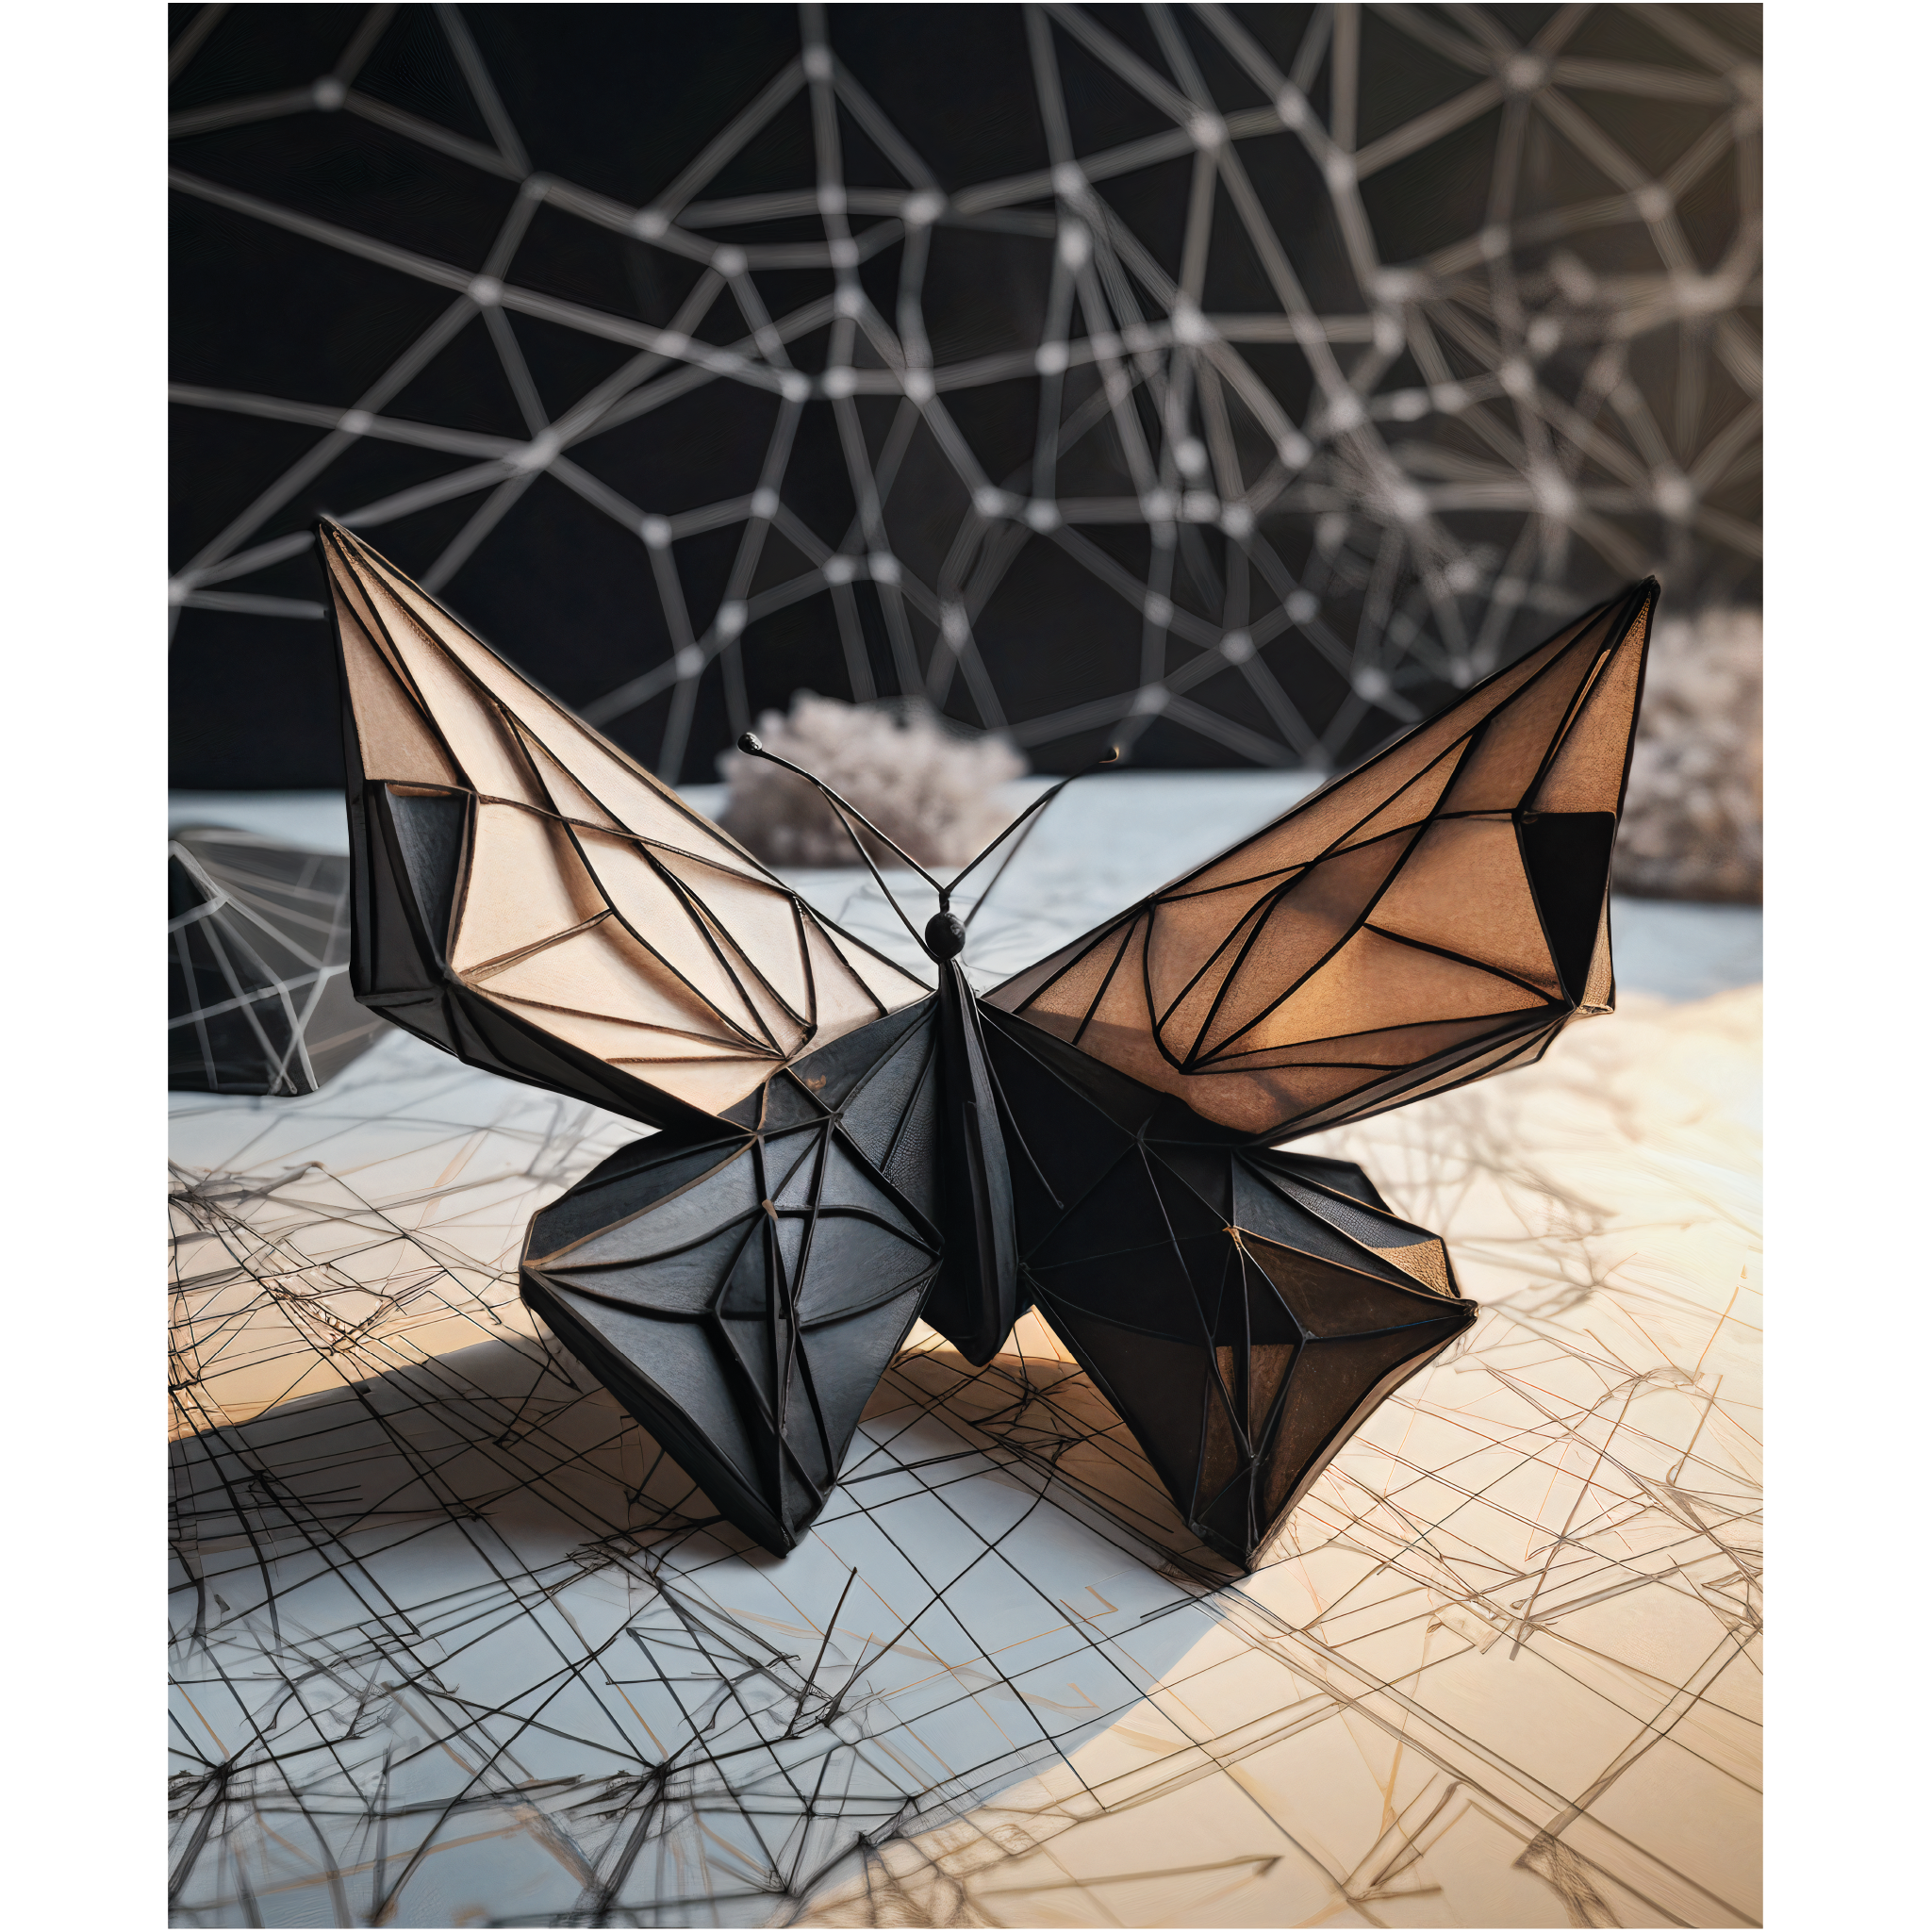 Butterfly Origami by Javad Bin Kuthub